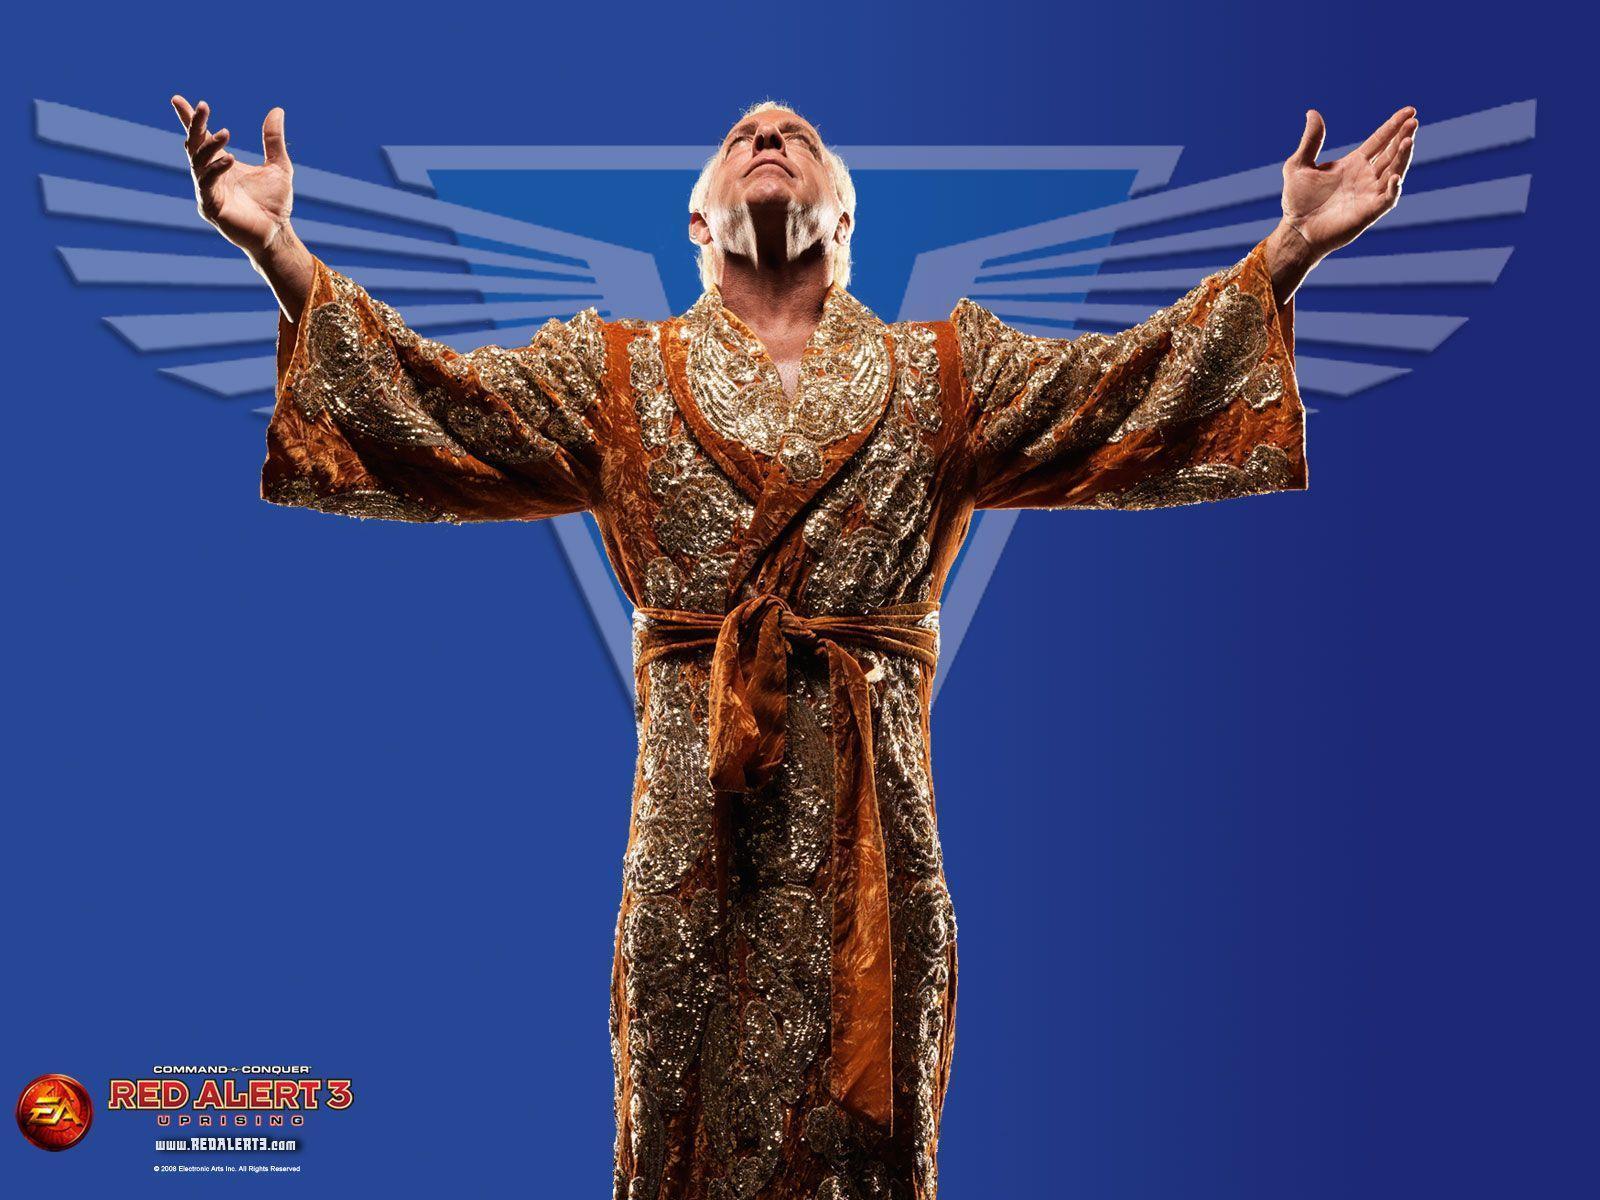 Ric Flair Wallpapers - Wallpaper Cave1600 x 1200